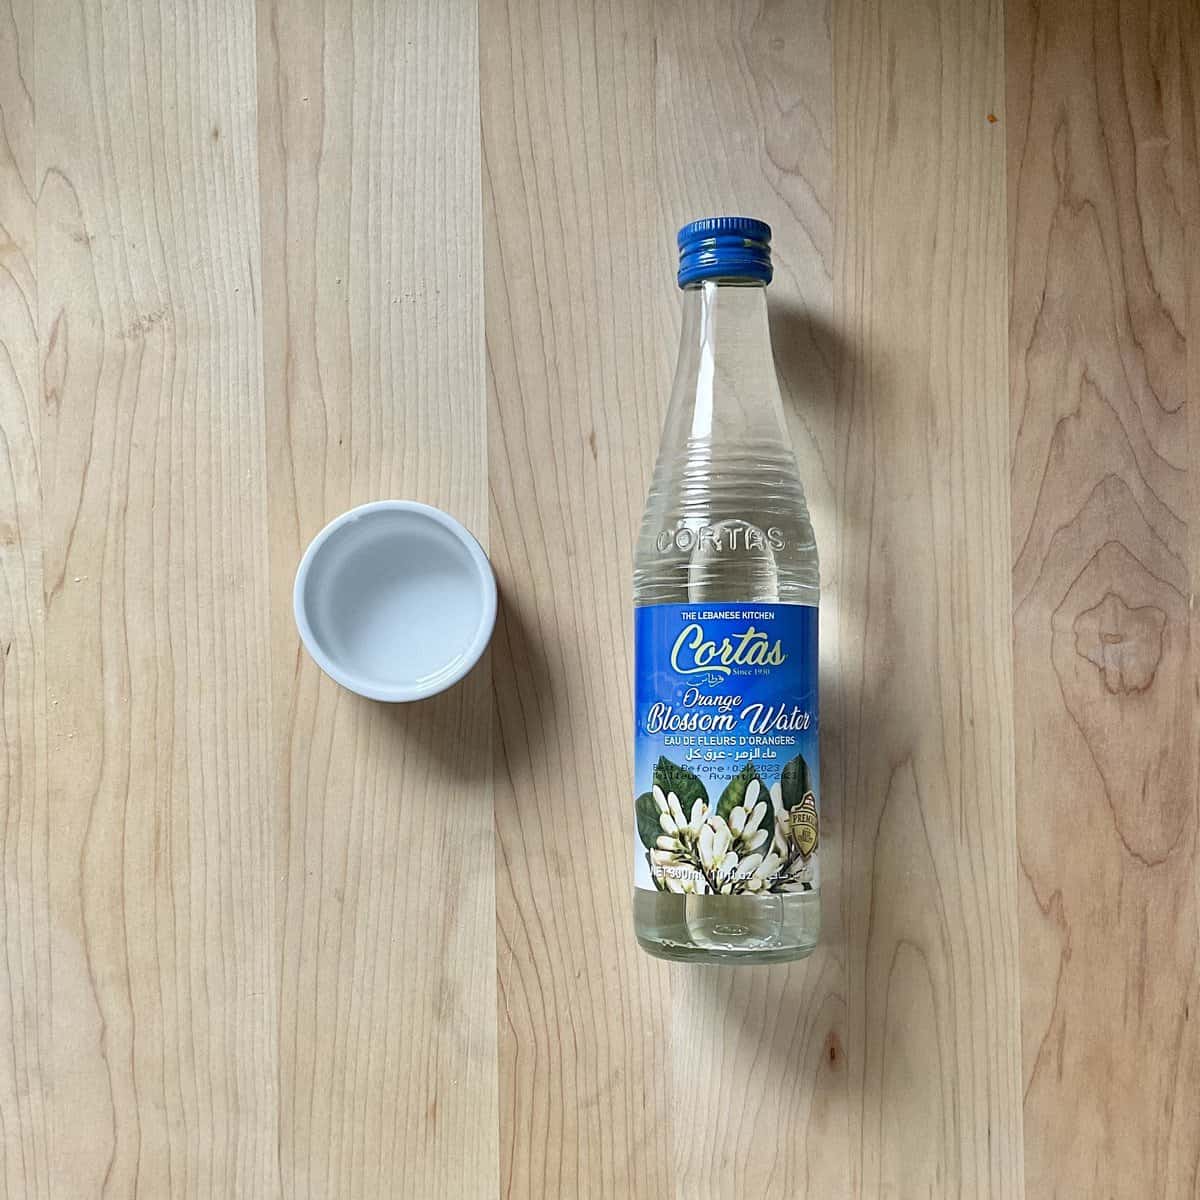 A bottle of orange blossom water on a wooden surface.